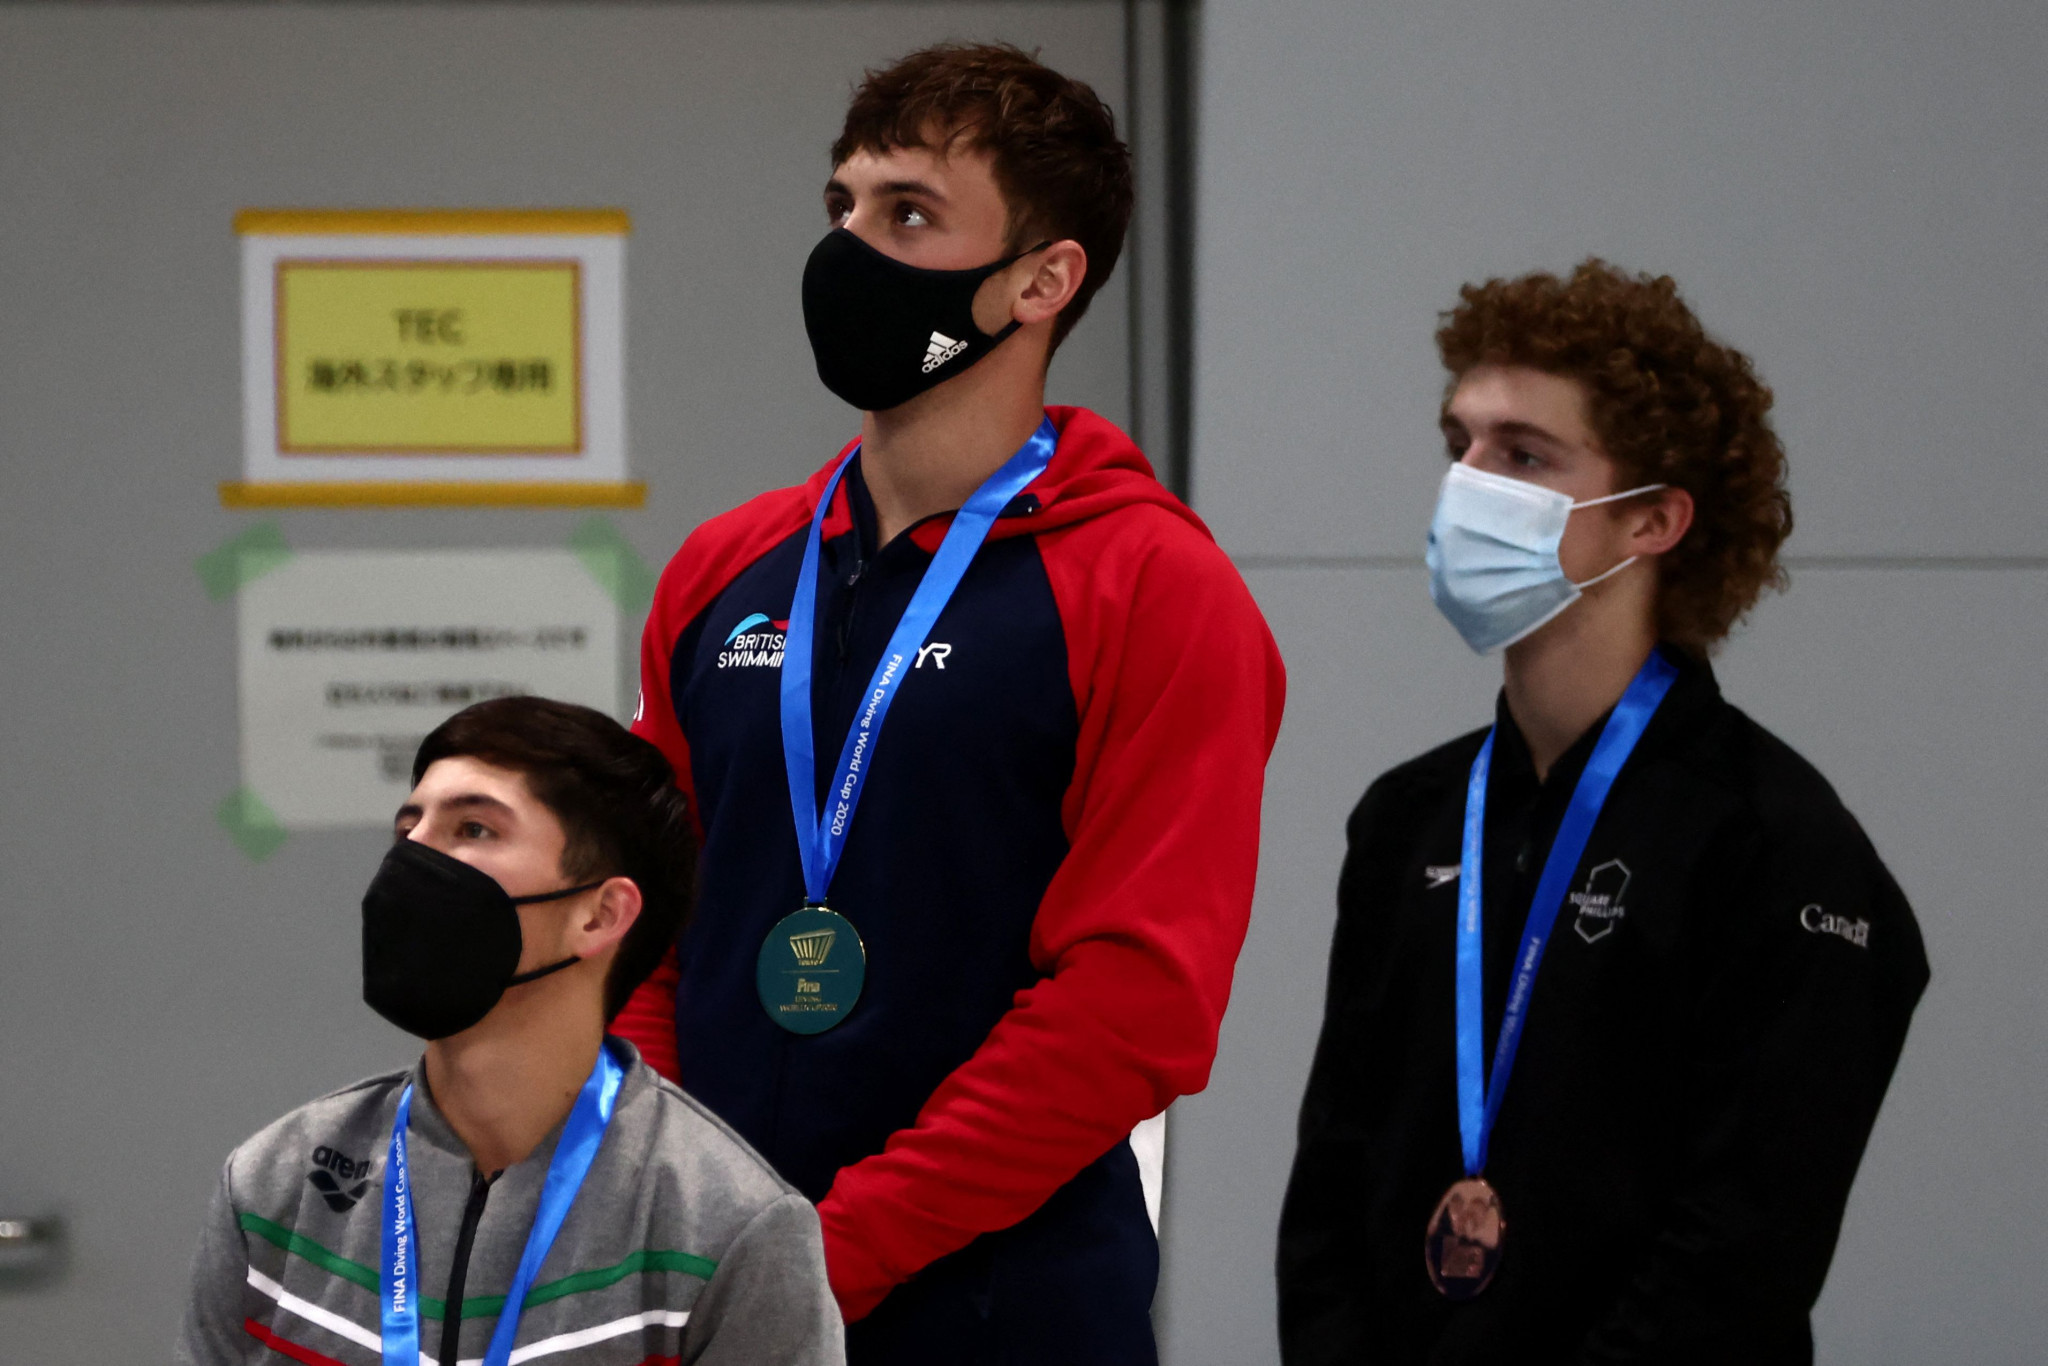 Chen and Daley triumph at FINA Diving World Cup in Tokyo